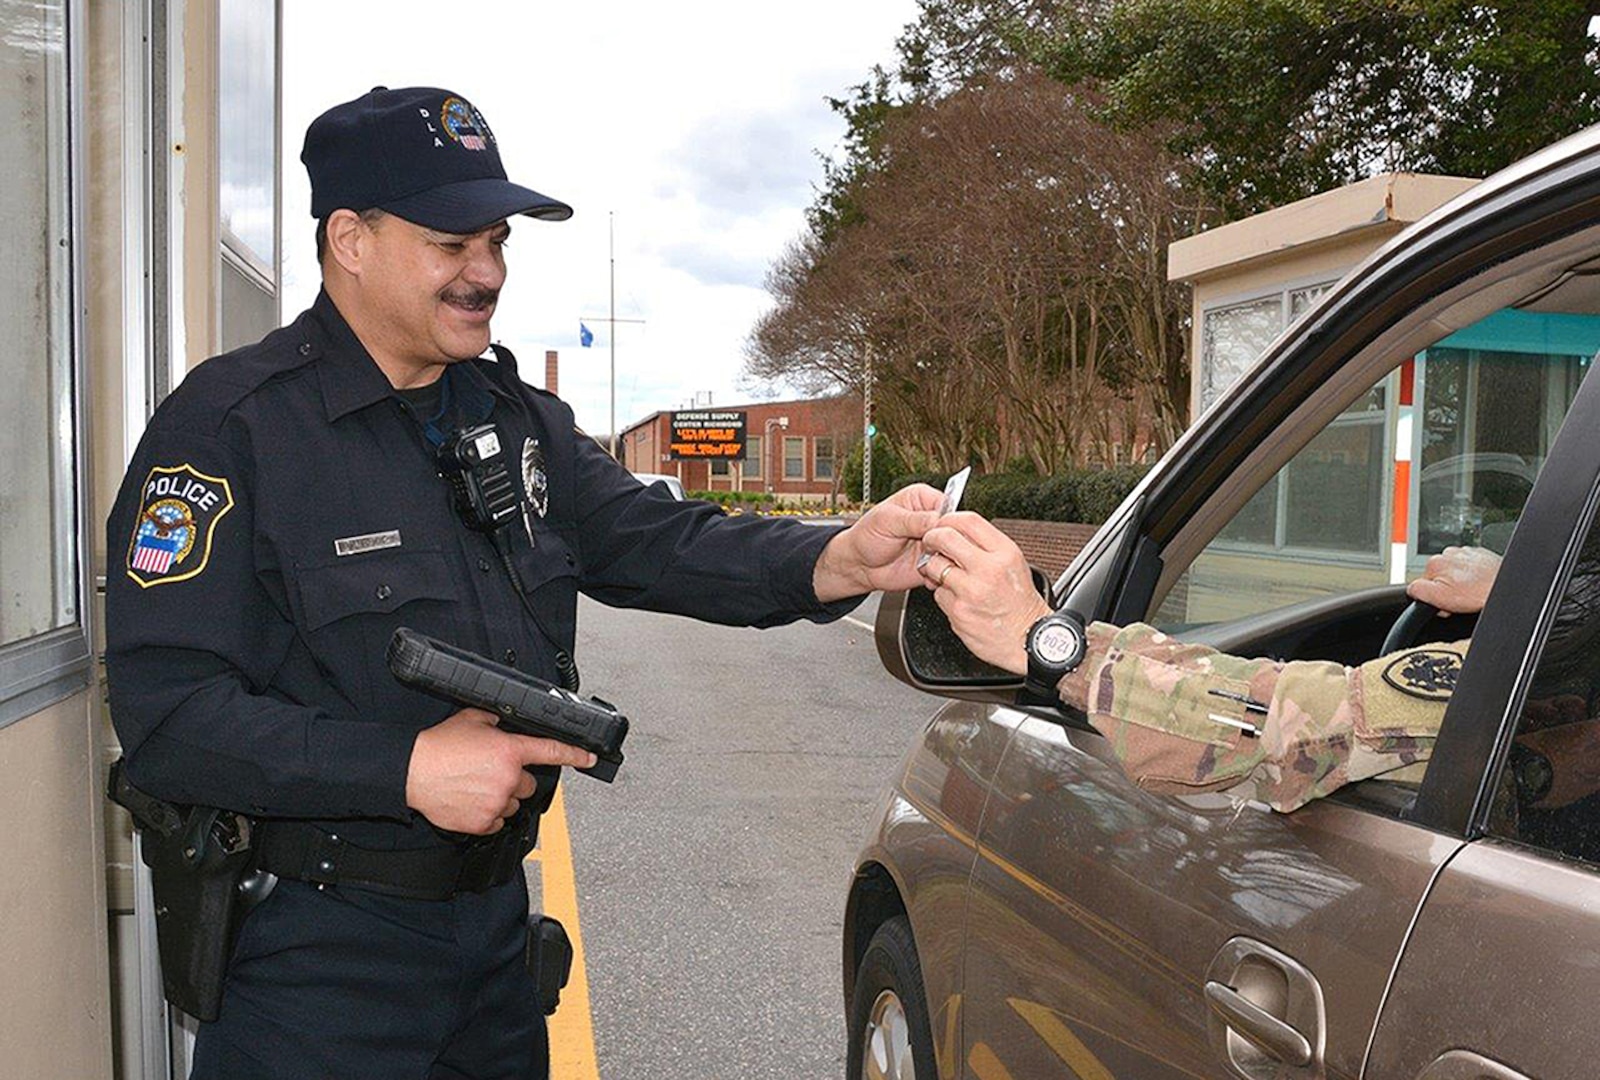 DLA Installation Operations Police Officer Kevin Buhler checks an identification card at the gate of Defense Supply Center Richmond, Virginia, using the Defense Biometric Identification System.